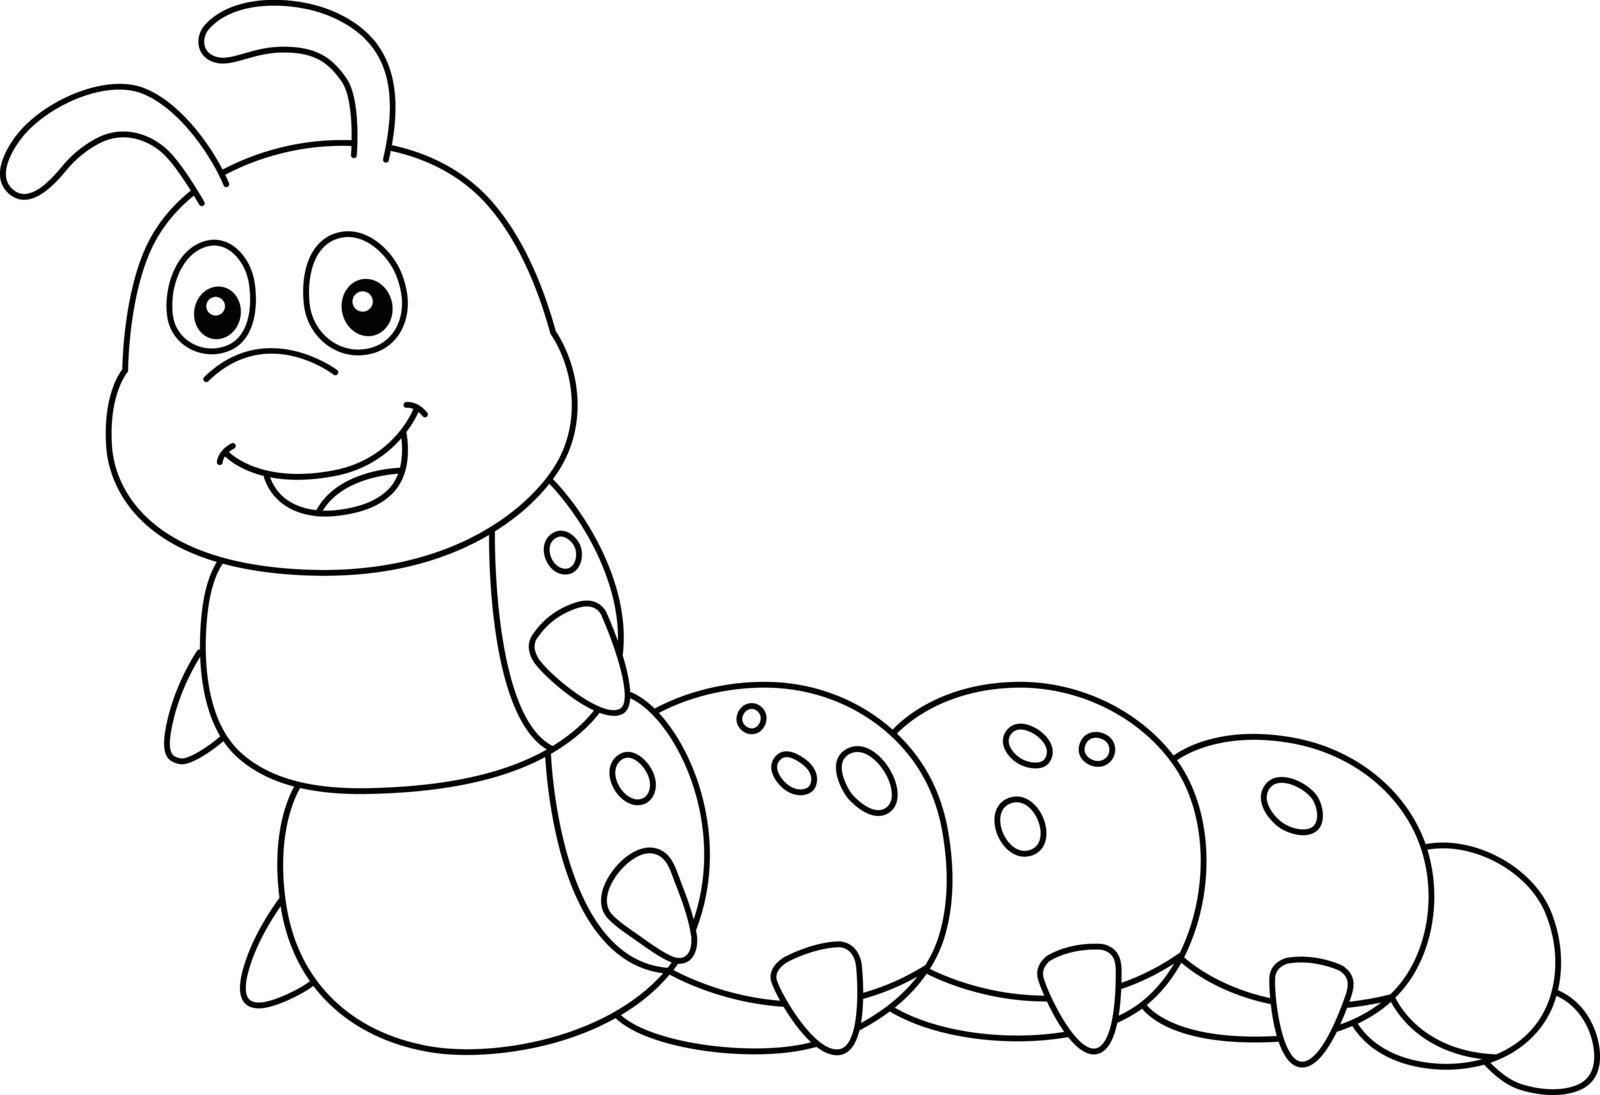 A cute and funny coloring page of a caterpillar farm animal. Provides hours of coloring fun for children. To color, this page is very easy. Suitable for little kids and toddlers.